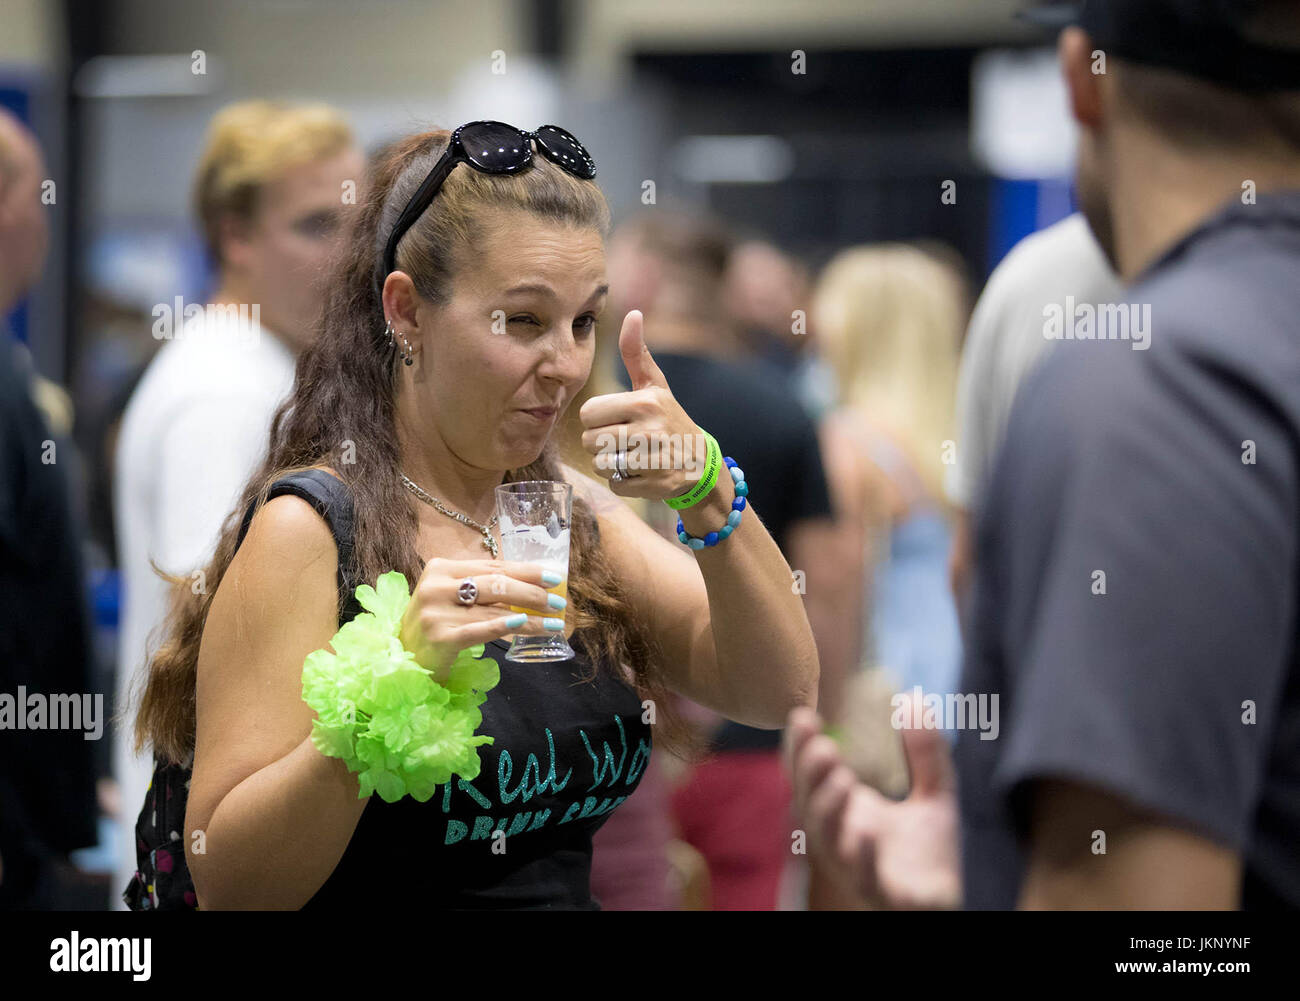 July 22, 2017 - West Palm Beach, Florida, U.S. - Millika Gill, Loxahatchee, gives a thumbs up to her beer sample from Twisted Truck Brewing booth at the Palm Beach Summer Beer Fest at the South Florida Fairgrounds in West Palm Beach, Florida on July 22, 2017. Beer lovers could sample more than 200 craft beers, all in air-conditioned comfort! The beer bash includes the following participating breweries: Twisted Trunk Brewing, Accomplice Brewery and Ciderworks, Ookapow Brewing Company, Devour Brewing Company, Saltwater Brewery, Barrel of Monks Brewing, Bangin' Banjo Brewing Company, Funky Buddha Stock Photo